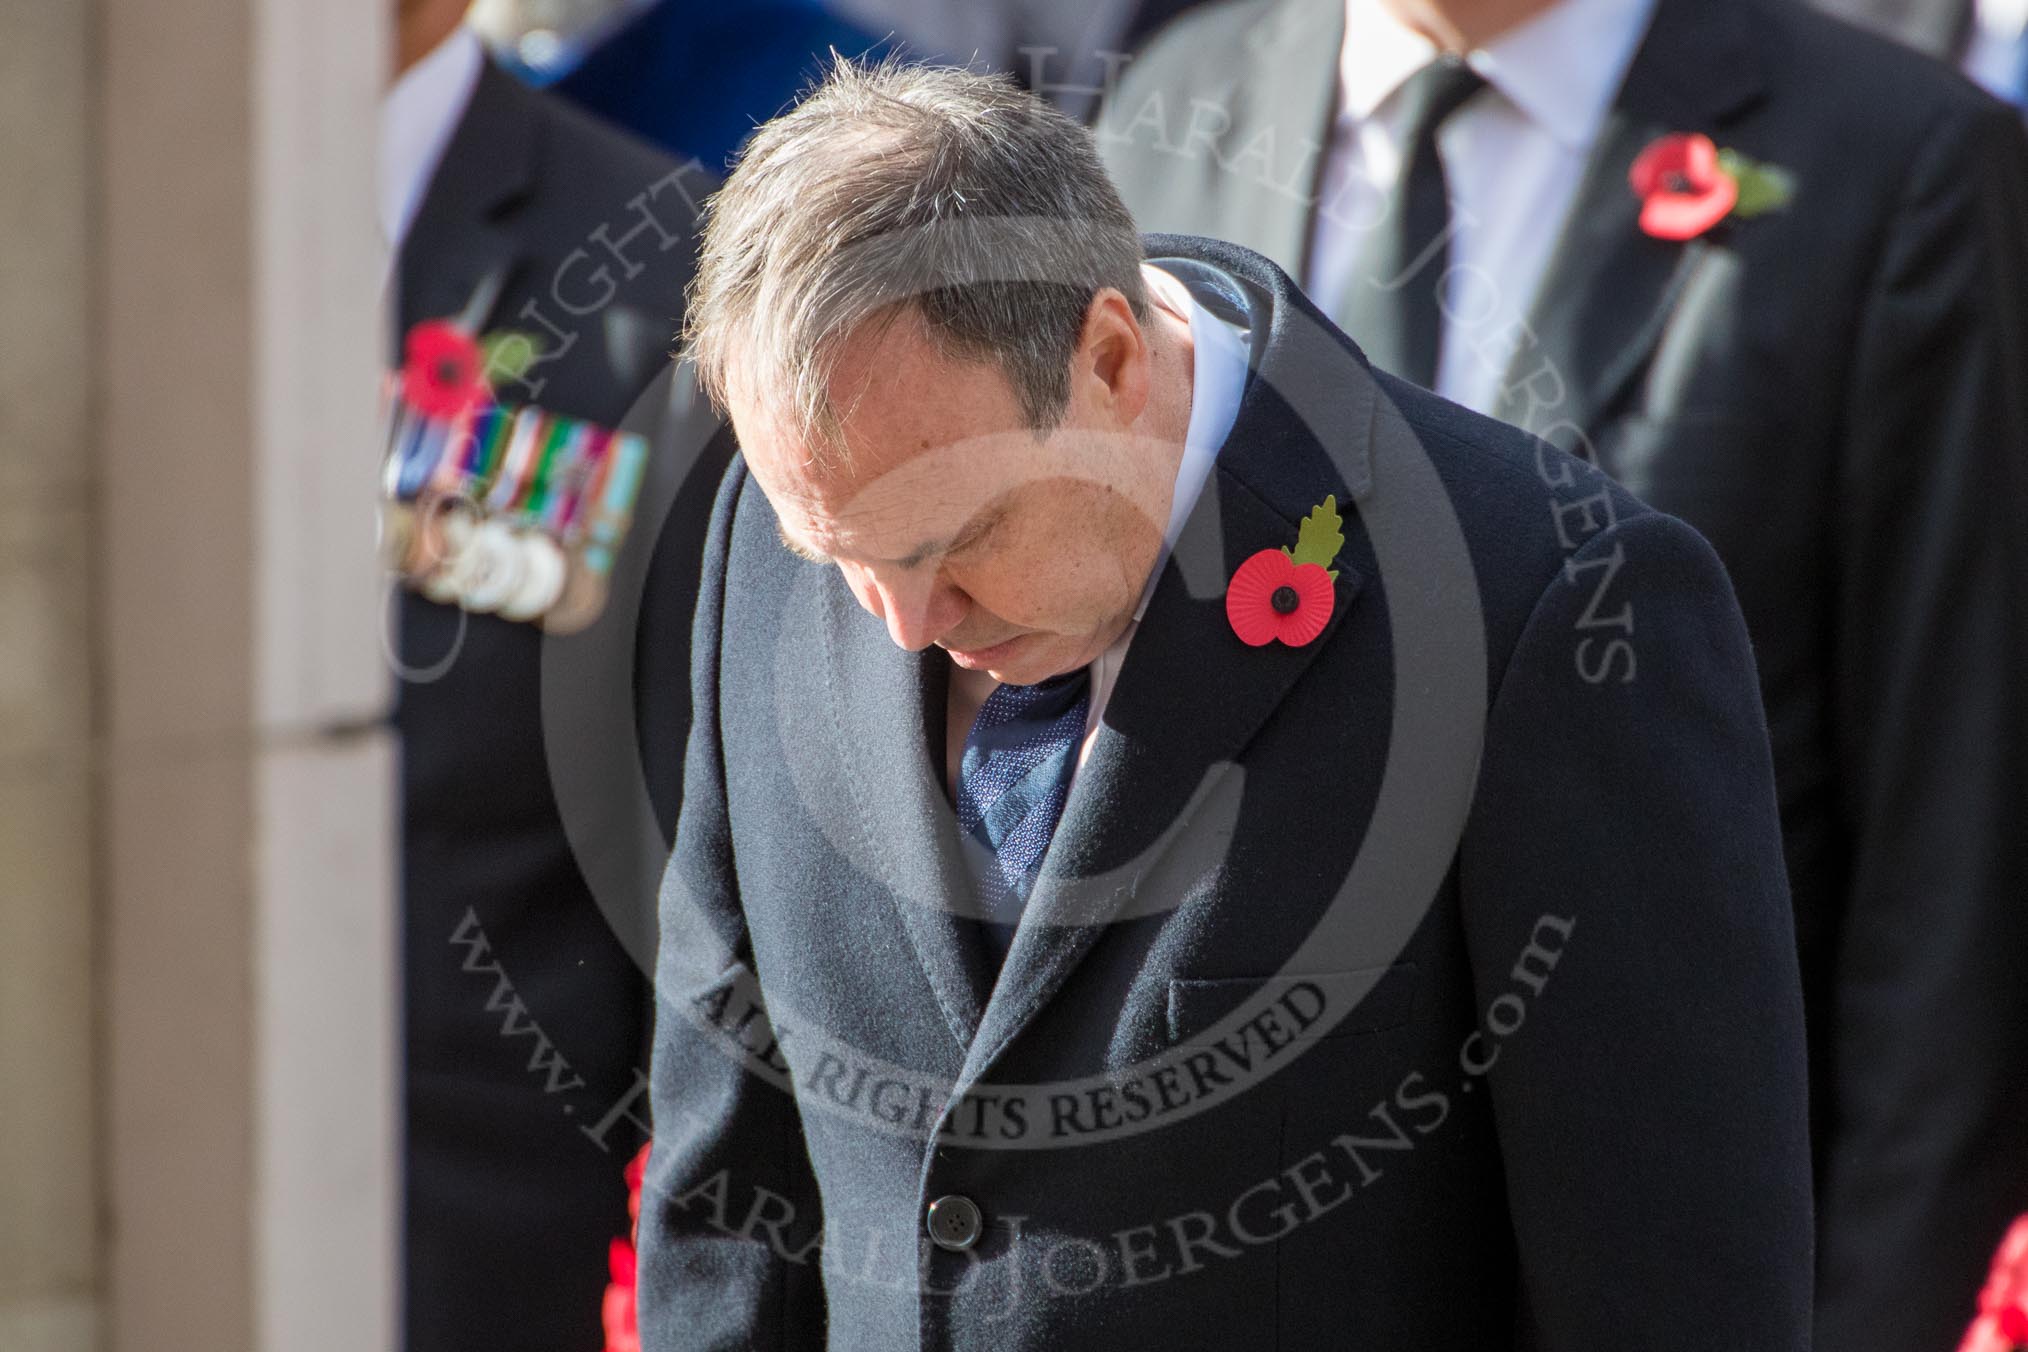 The Rt Hon Nigel Dodds OBE MP (Westminster Democratic Unionist Party Leader) during the Remembrance Sunday Cenotaph Ceremony 2018 at Horse Guards Parade, Westminster, London, 11 November 2018, 11:10.